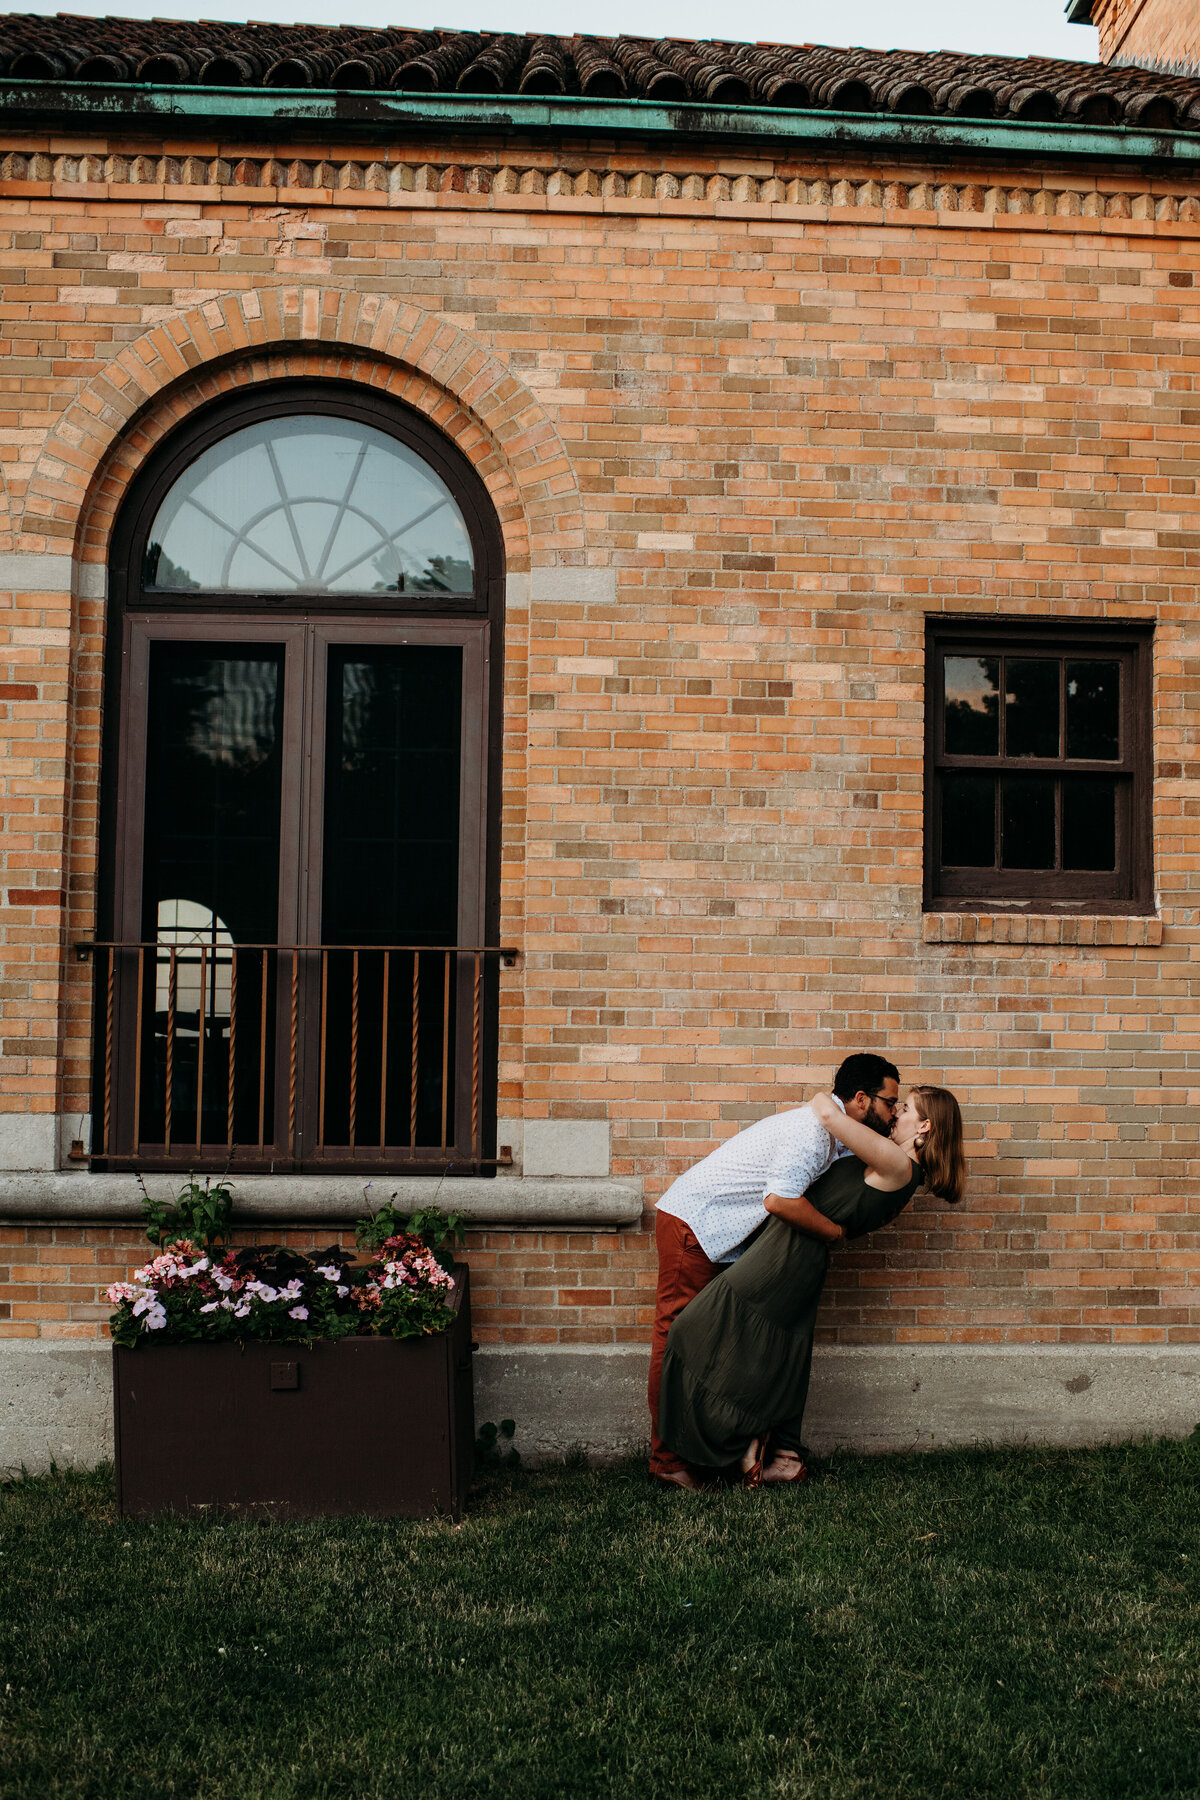 Man dipping woman and kissing her in front of brick building